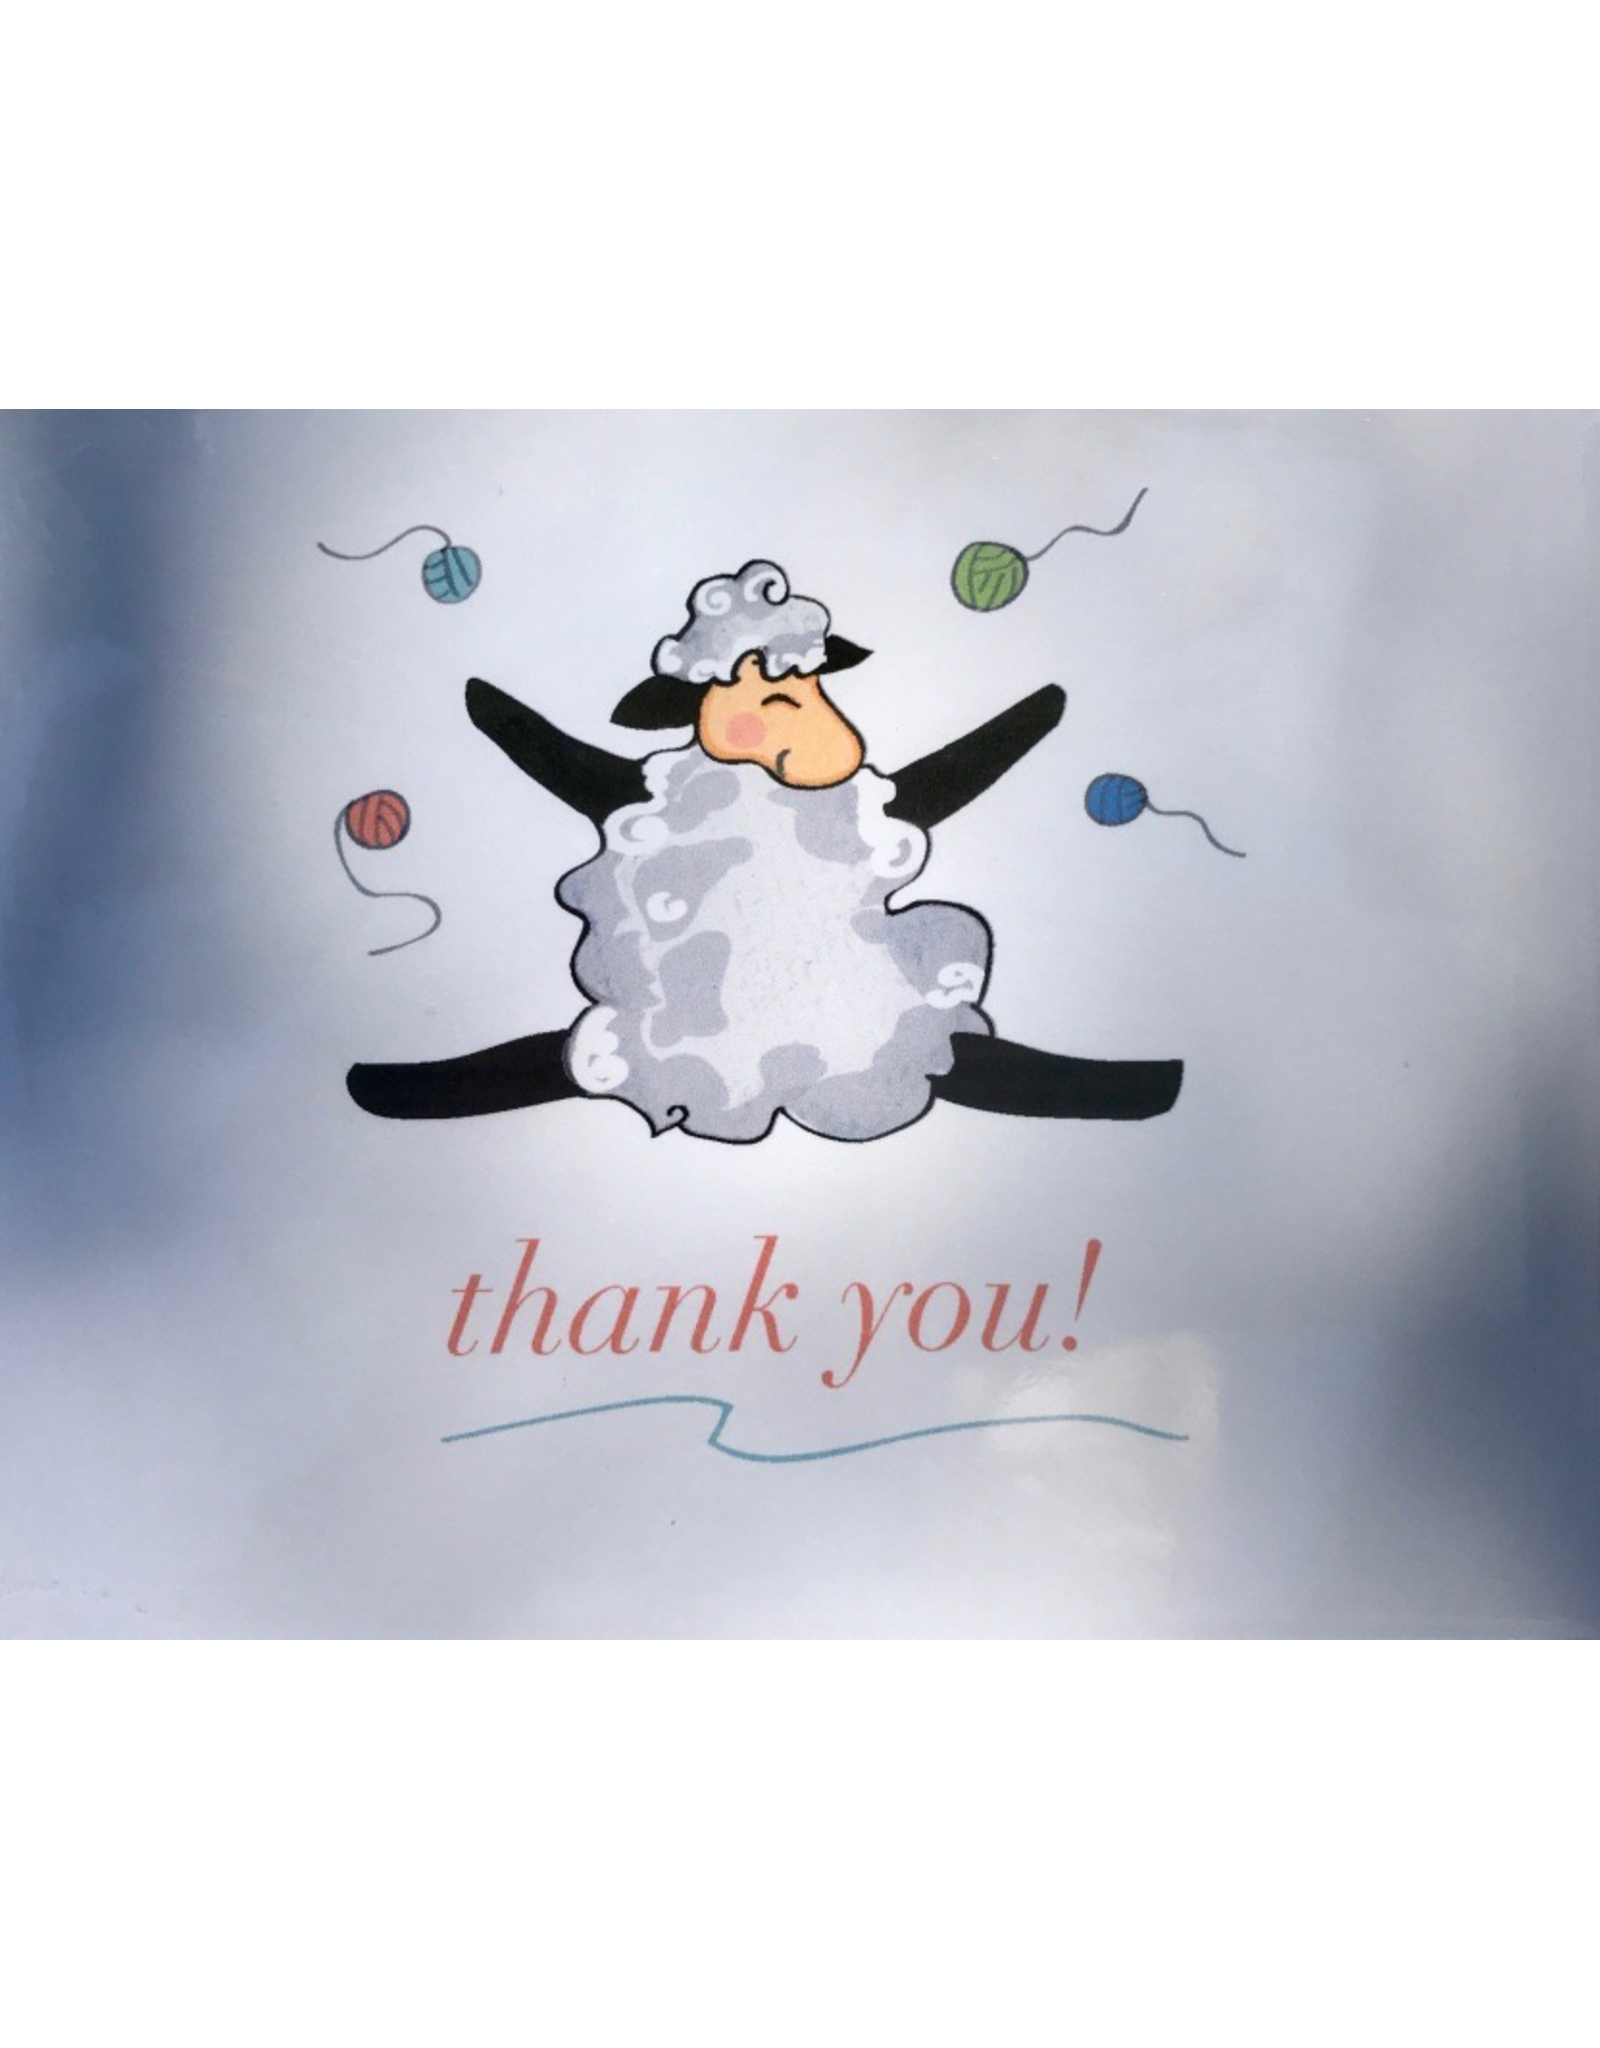 Knit Baah Purl Sweet Degrees of Thanks Card Collection